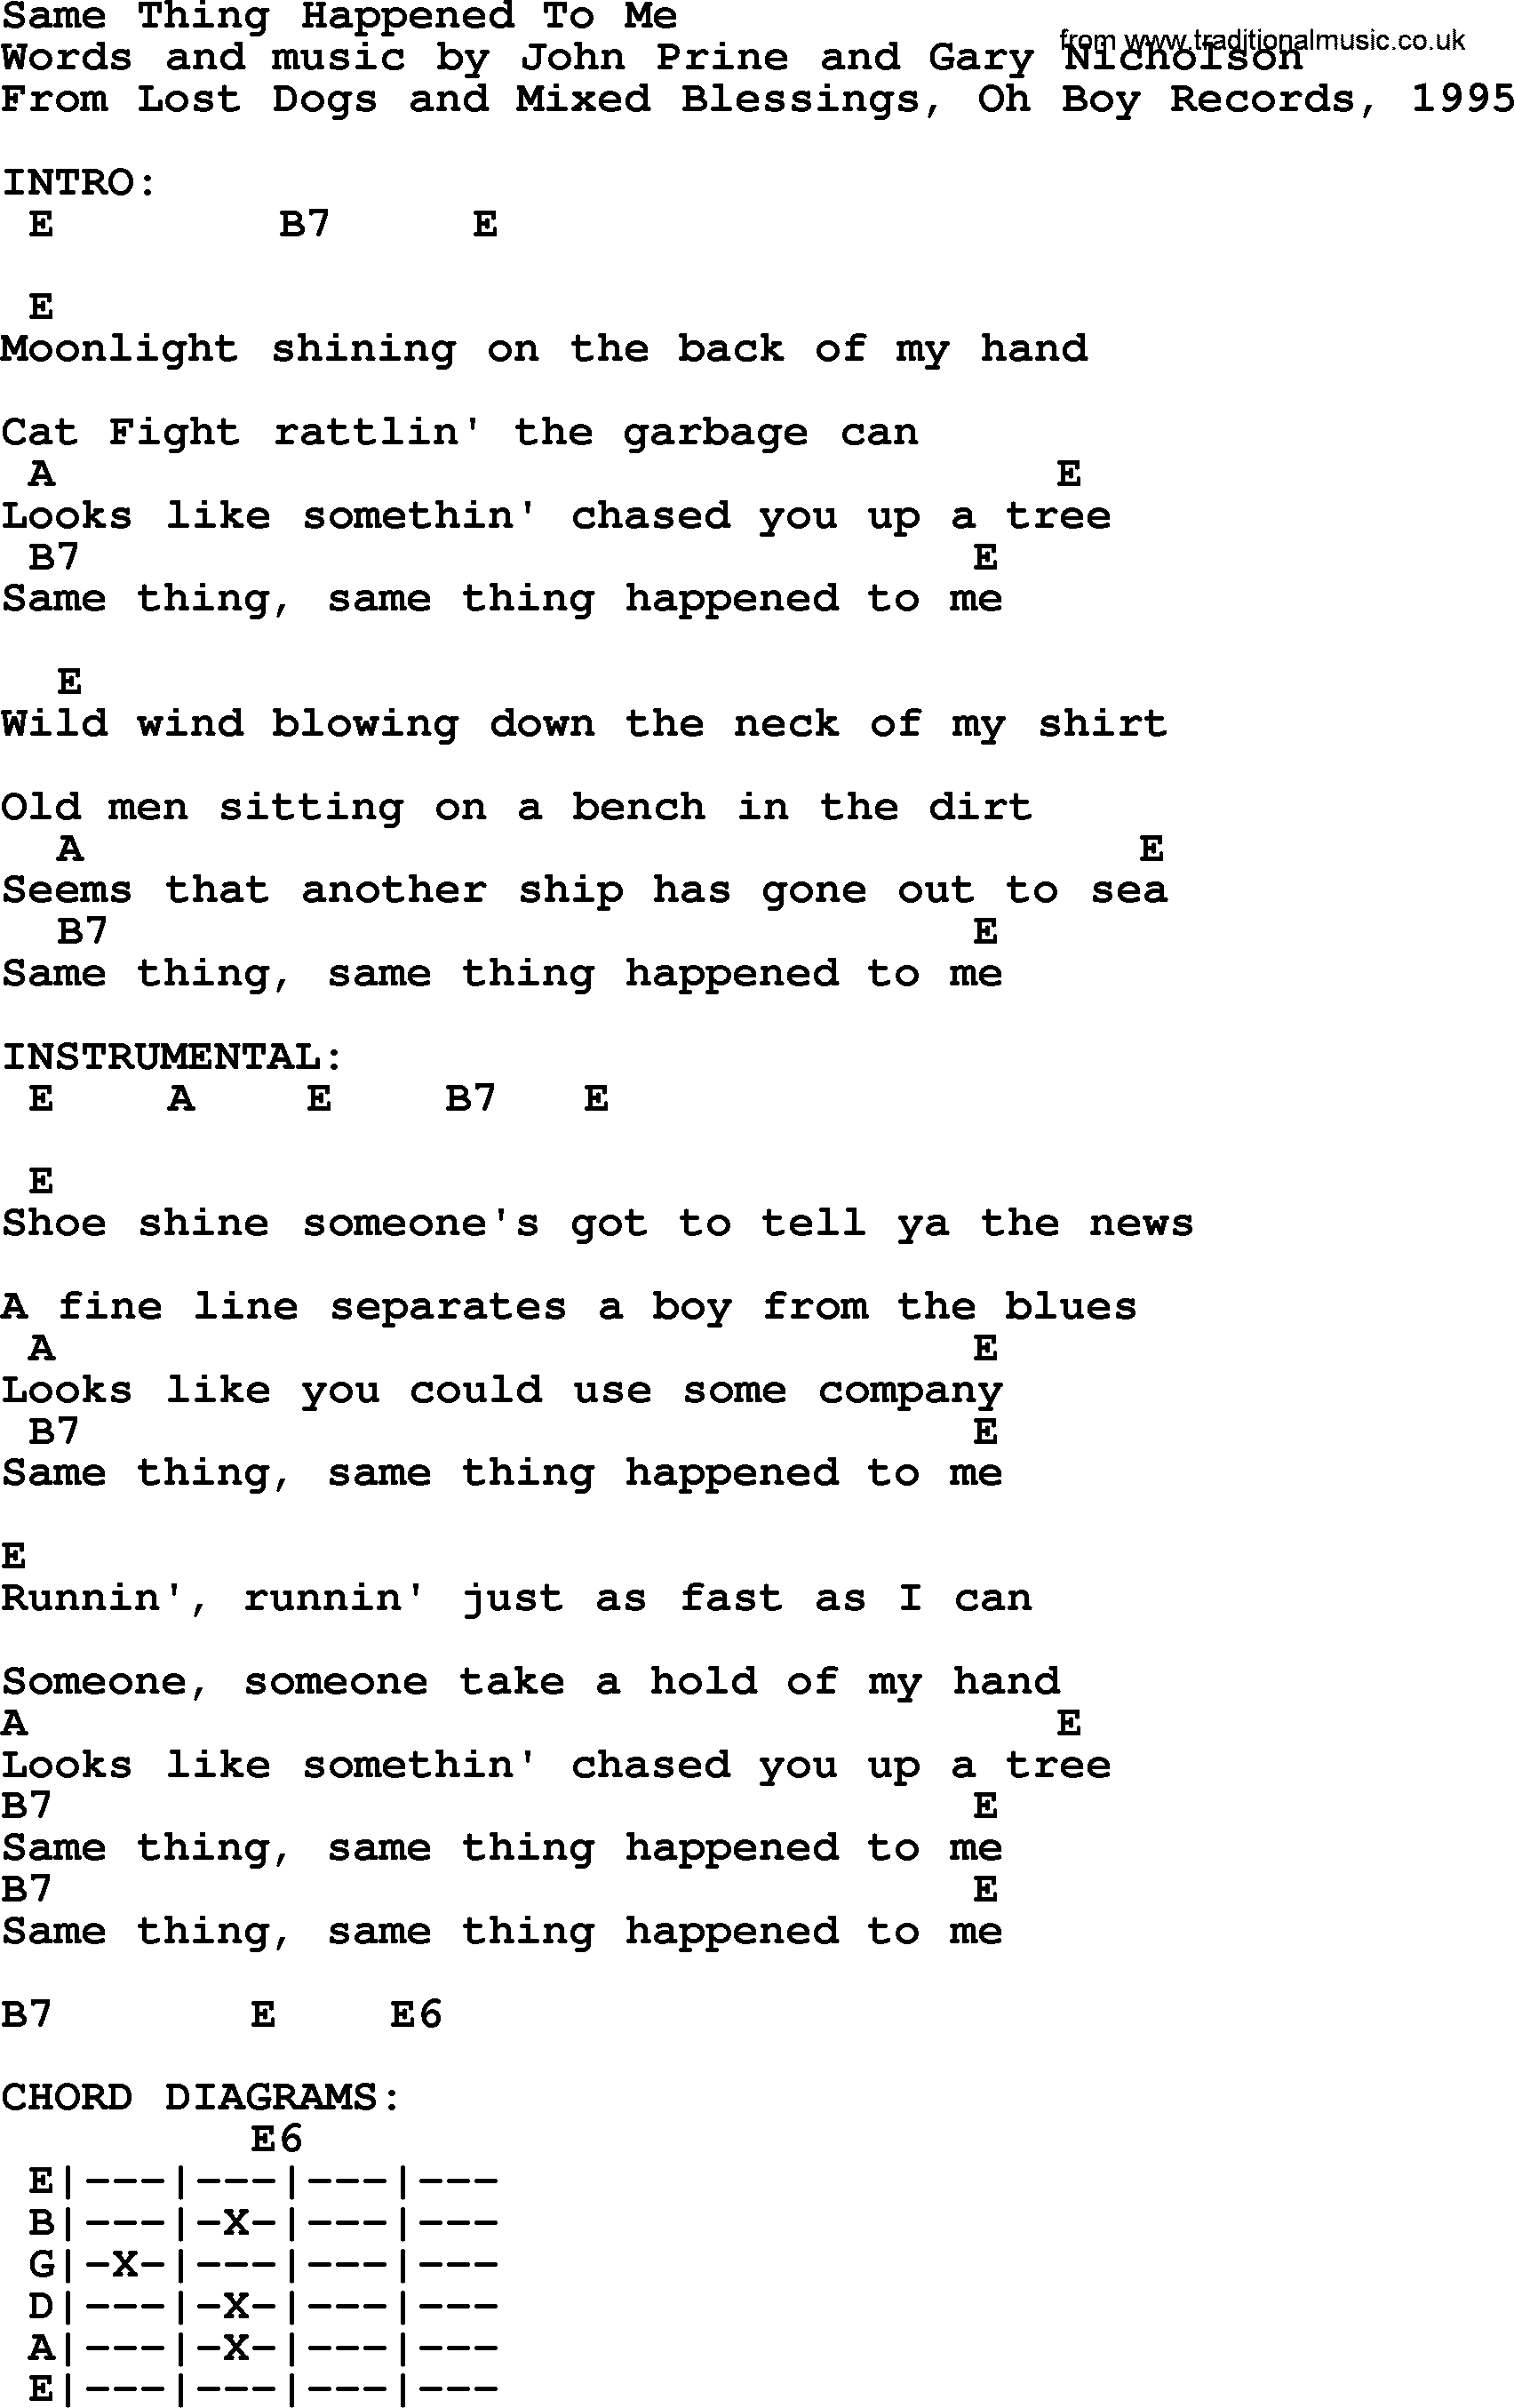 Bluegrass song: Same Thing Happened To Me, lyrics and chords